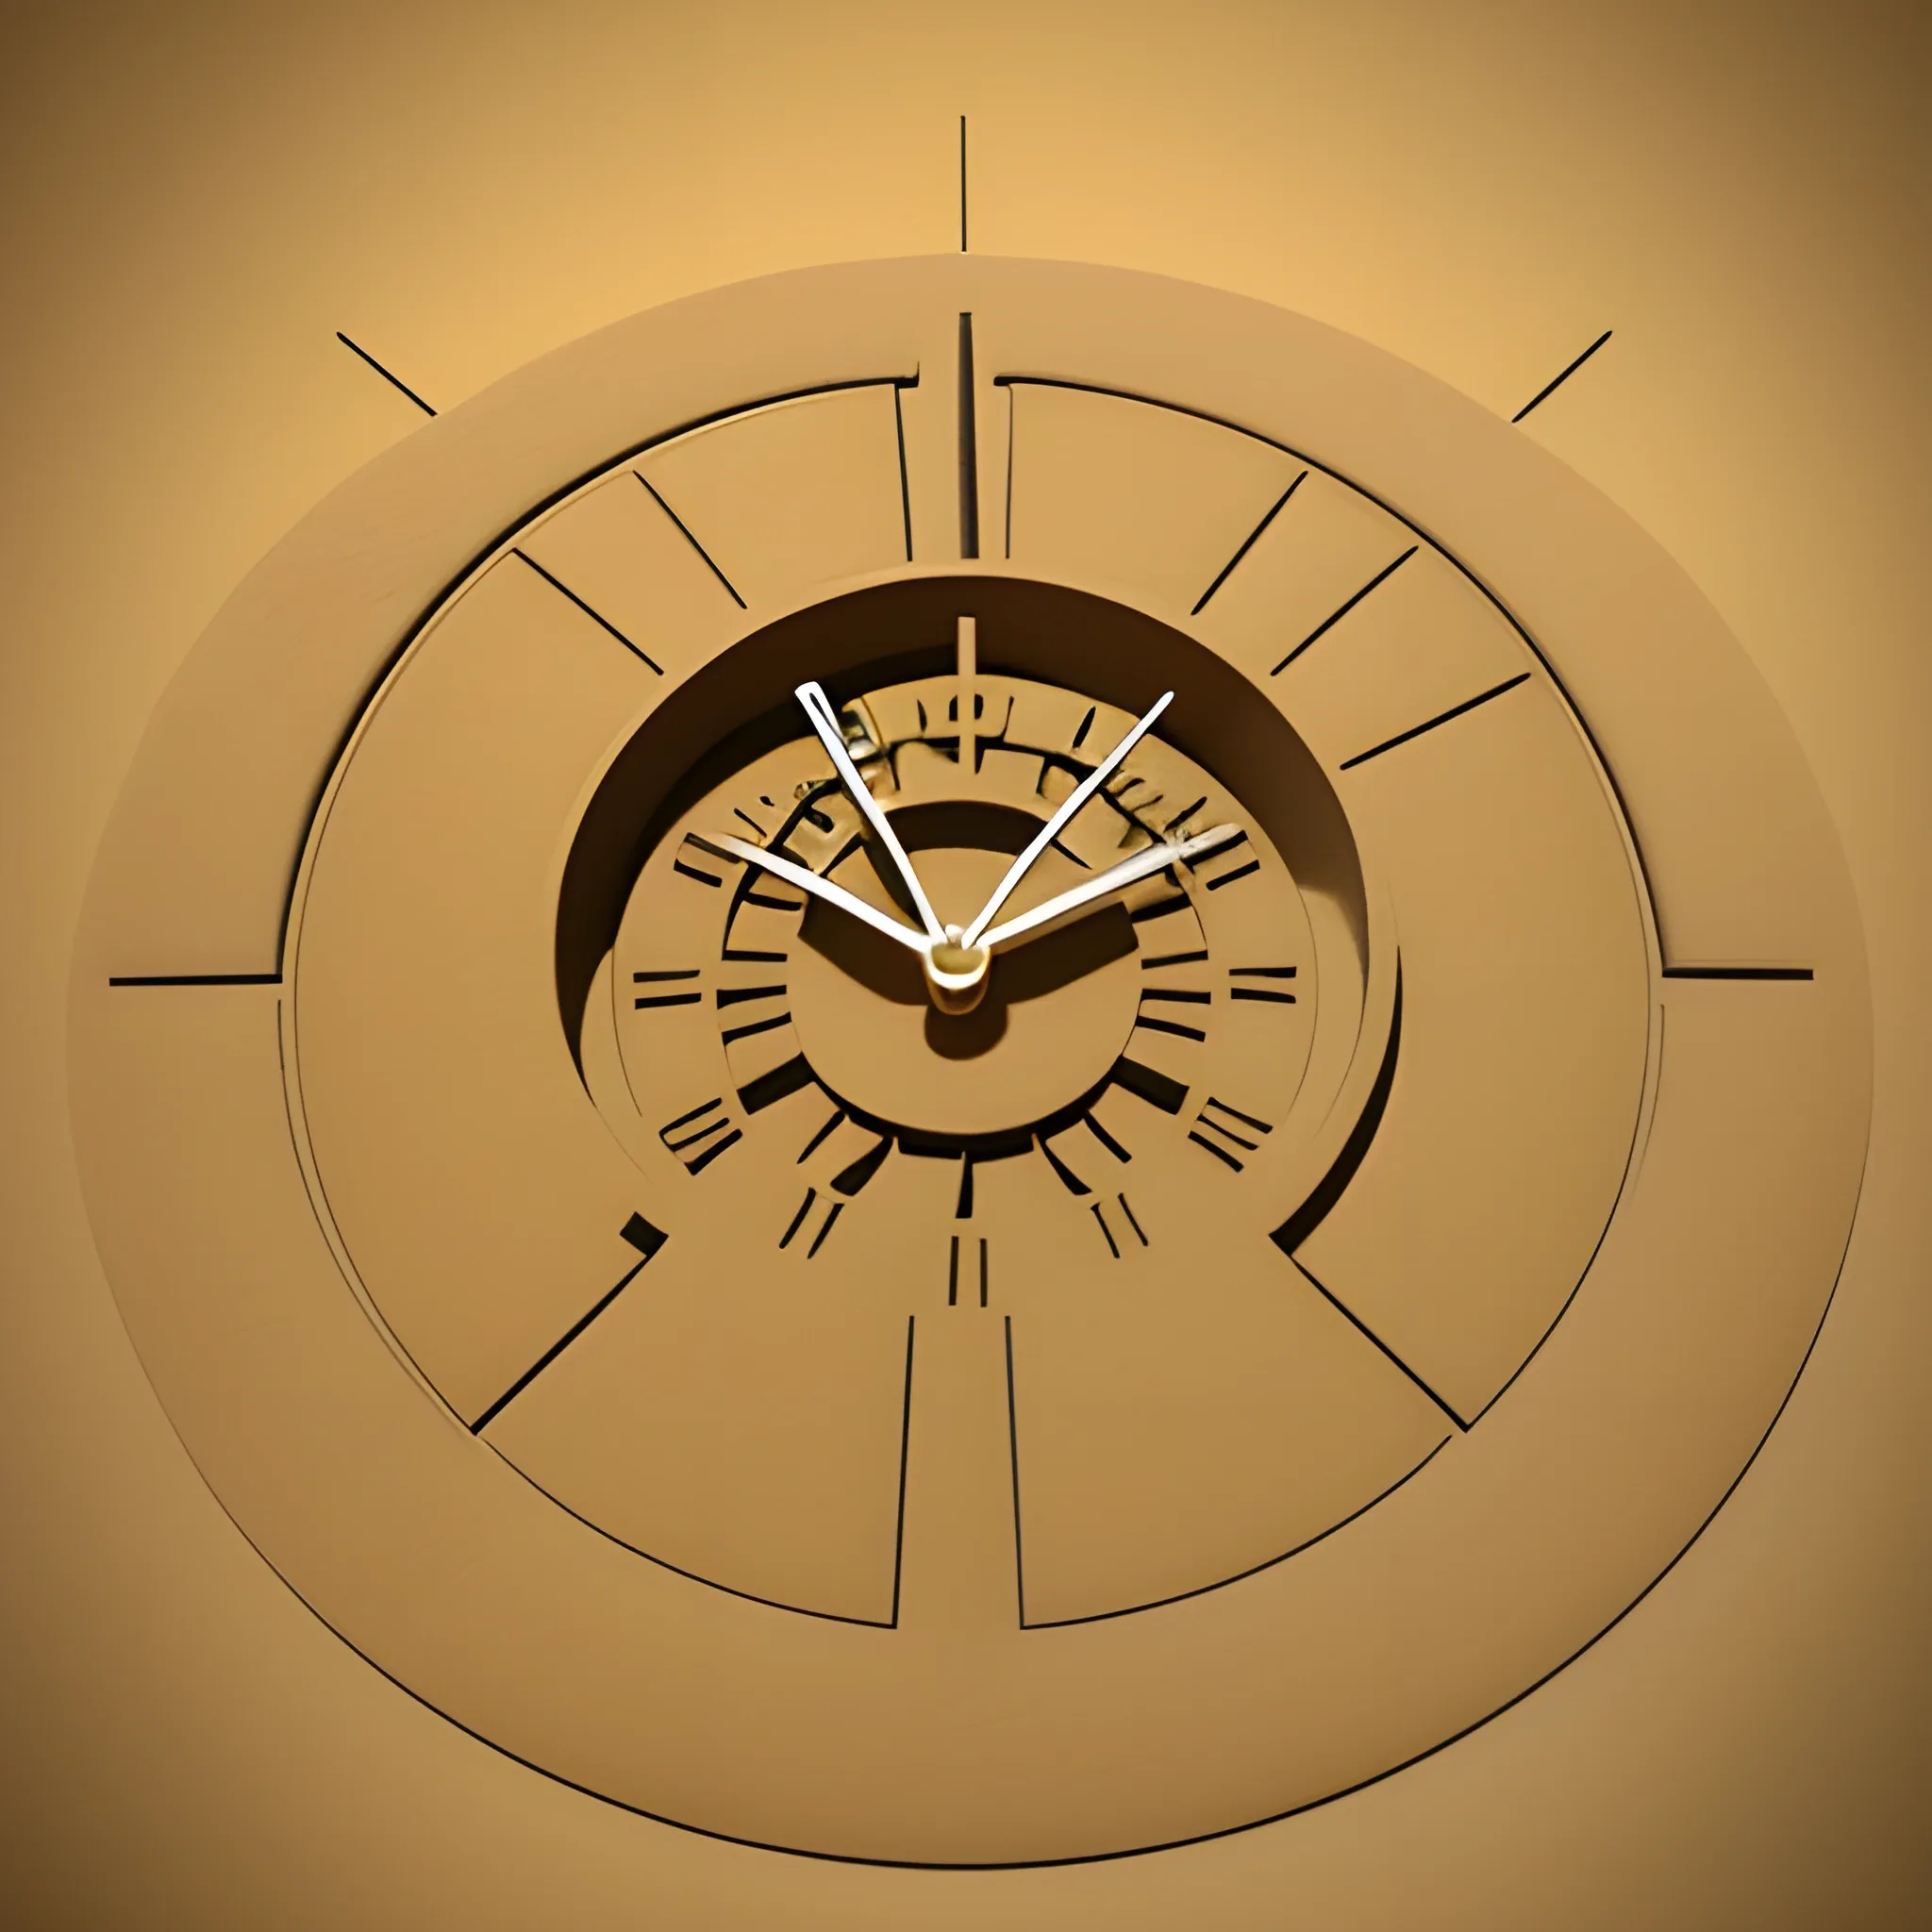 Sand Clock 3d style on beige background
, 3D